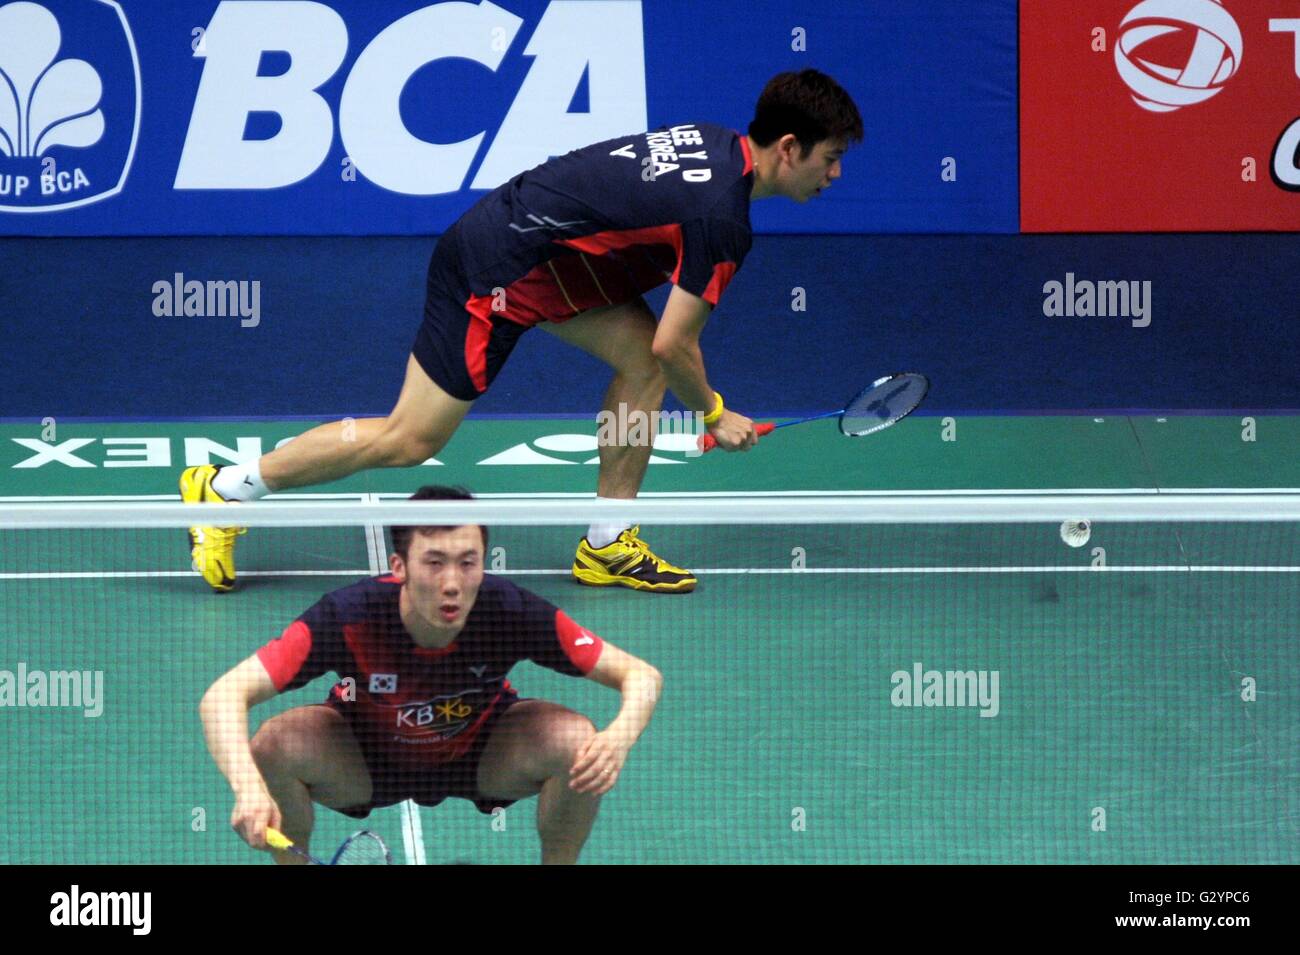 Jakarta, DKI Jakarta, Indonesia. 5th June, 2016. JAKARTA, INDONESIA - JUNE 05 : Lee Yong Dae/Yoo Yeon Seong of Korea hits a return against Chai Biao/Hong Wei of China during men's double in the Indonesia Open 2016 in Jakarta, Indonesia on June 05, 2016. Lee Yong Dae/Yoo Yeon Seong of Korea win Indonesia Badminton Open with score 13-21, 21-13 and 21-16. © Sijori Images/ZUMA Wire/Alamy Live News Stock Photo